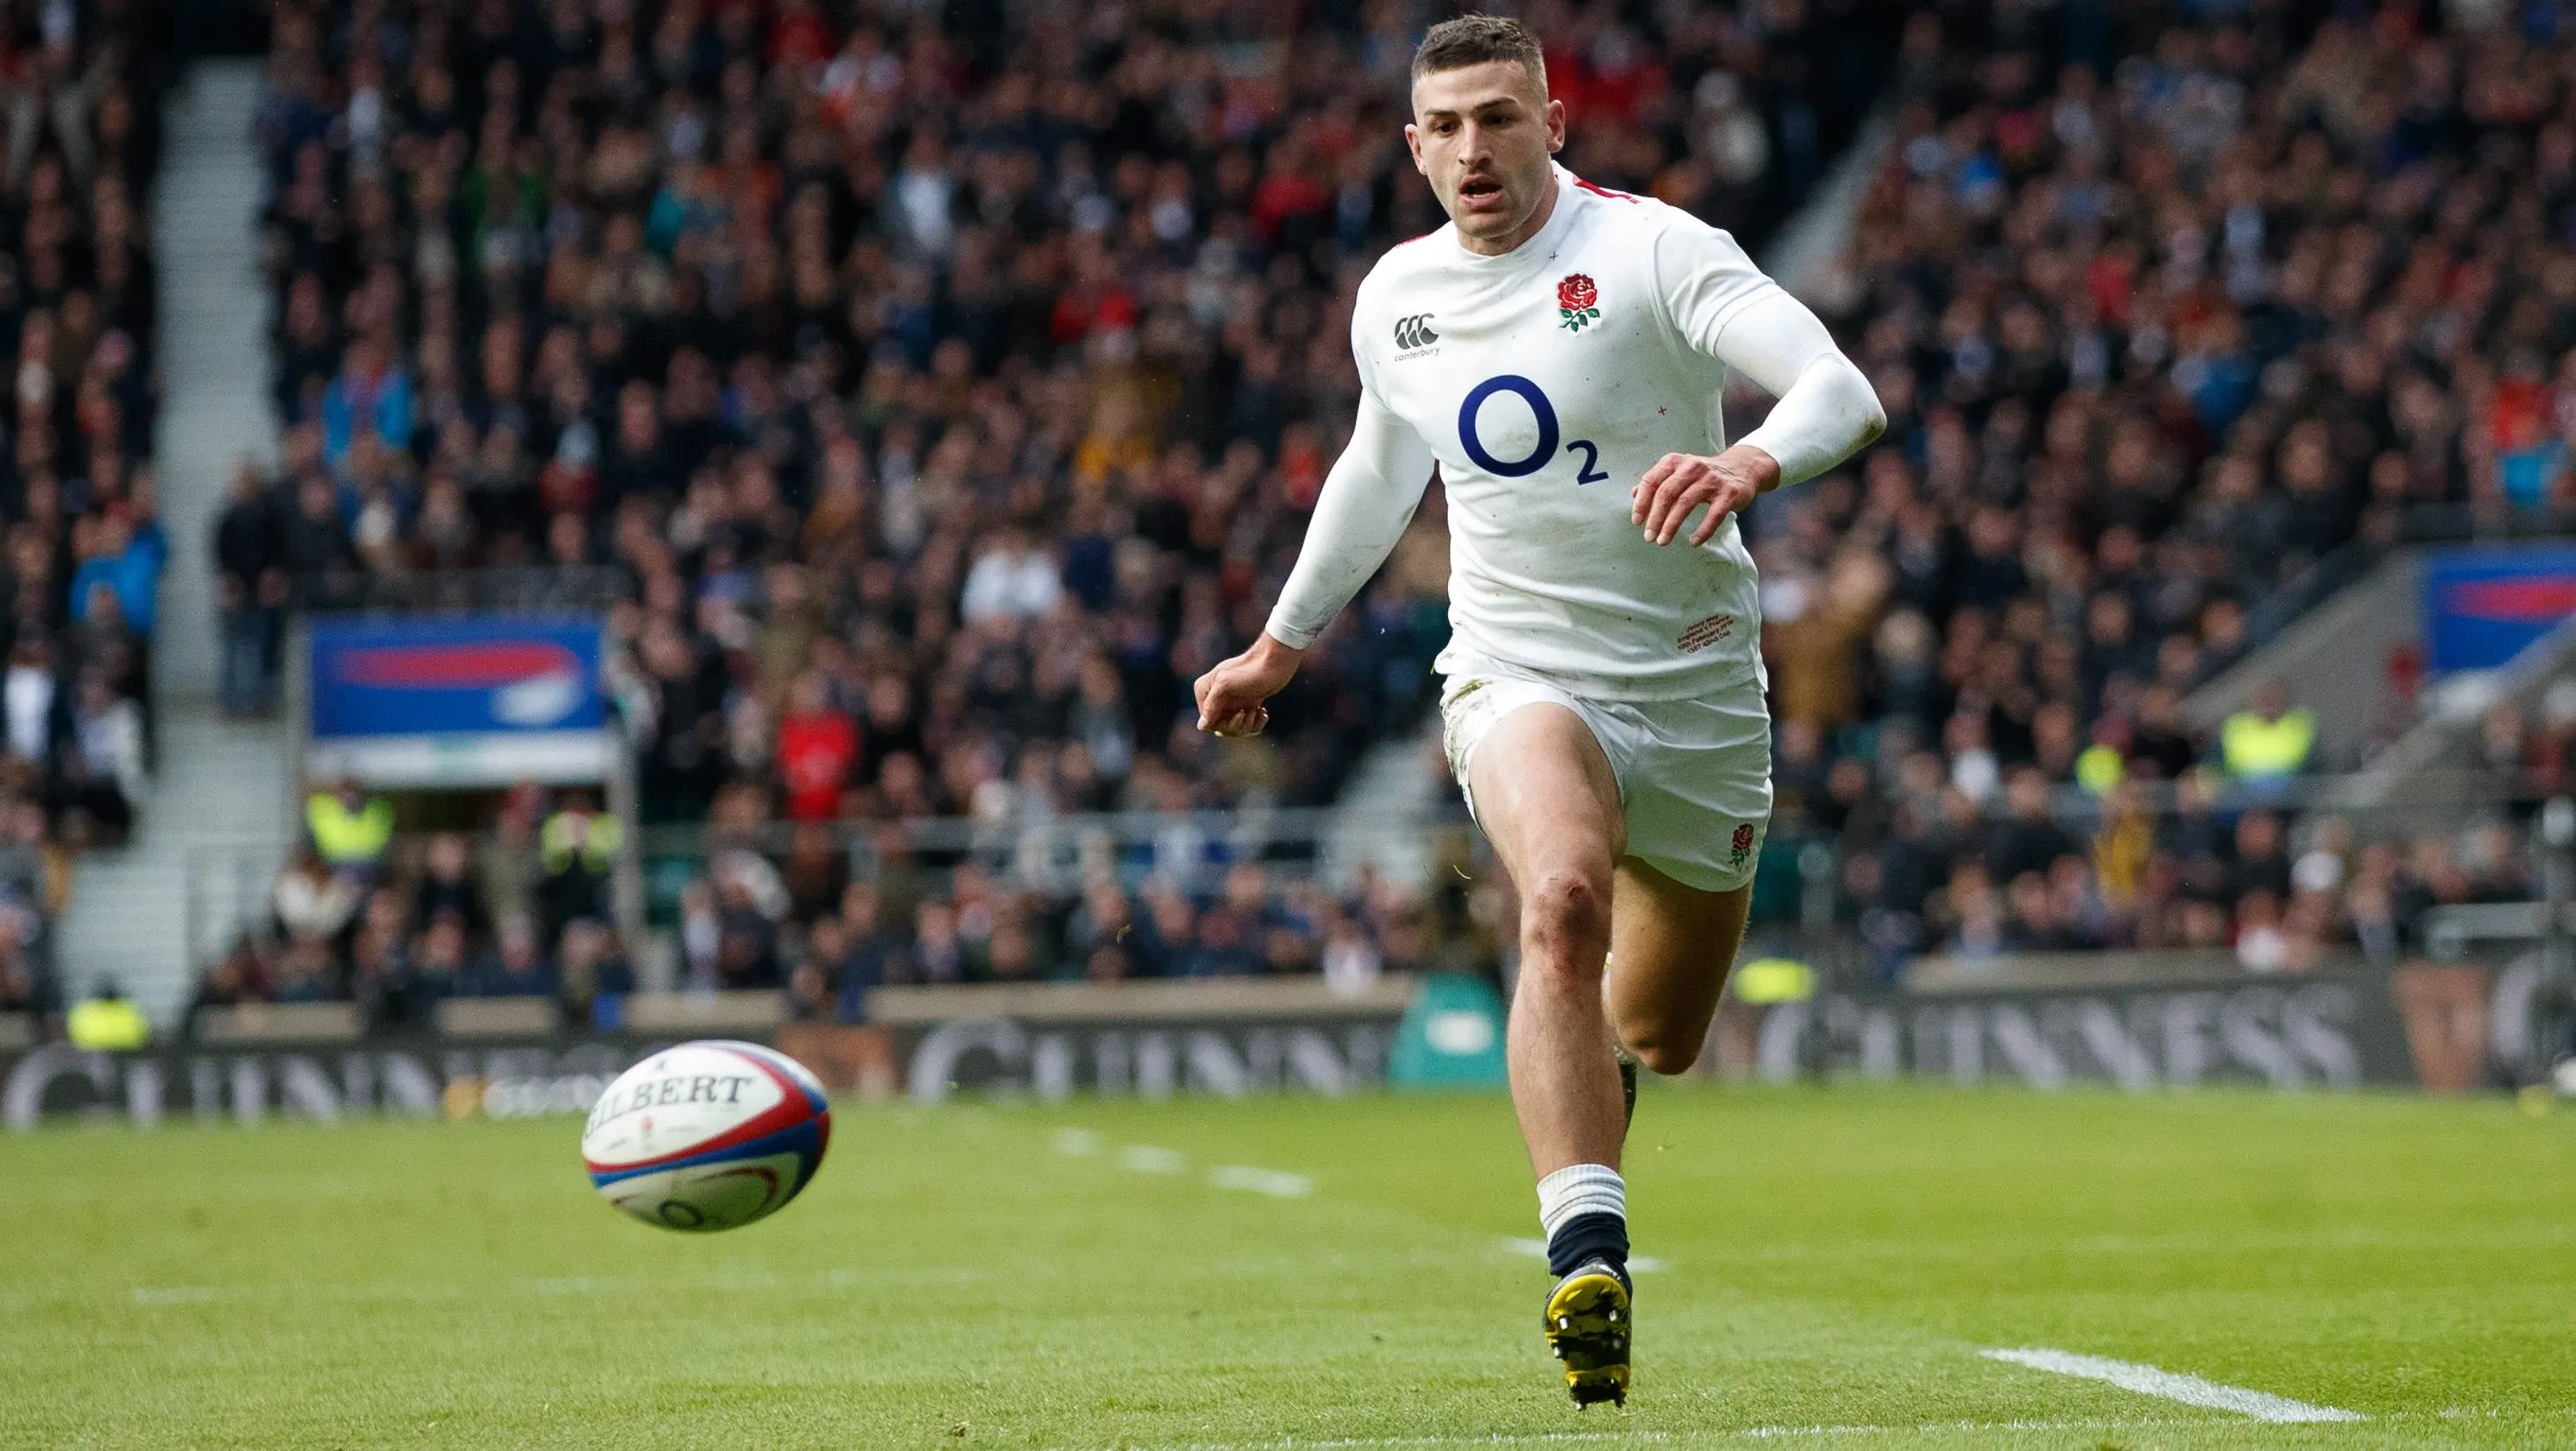 Jonny May on his way to scoring his sides third try 10/2/2019